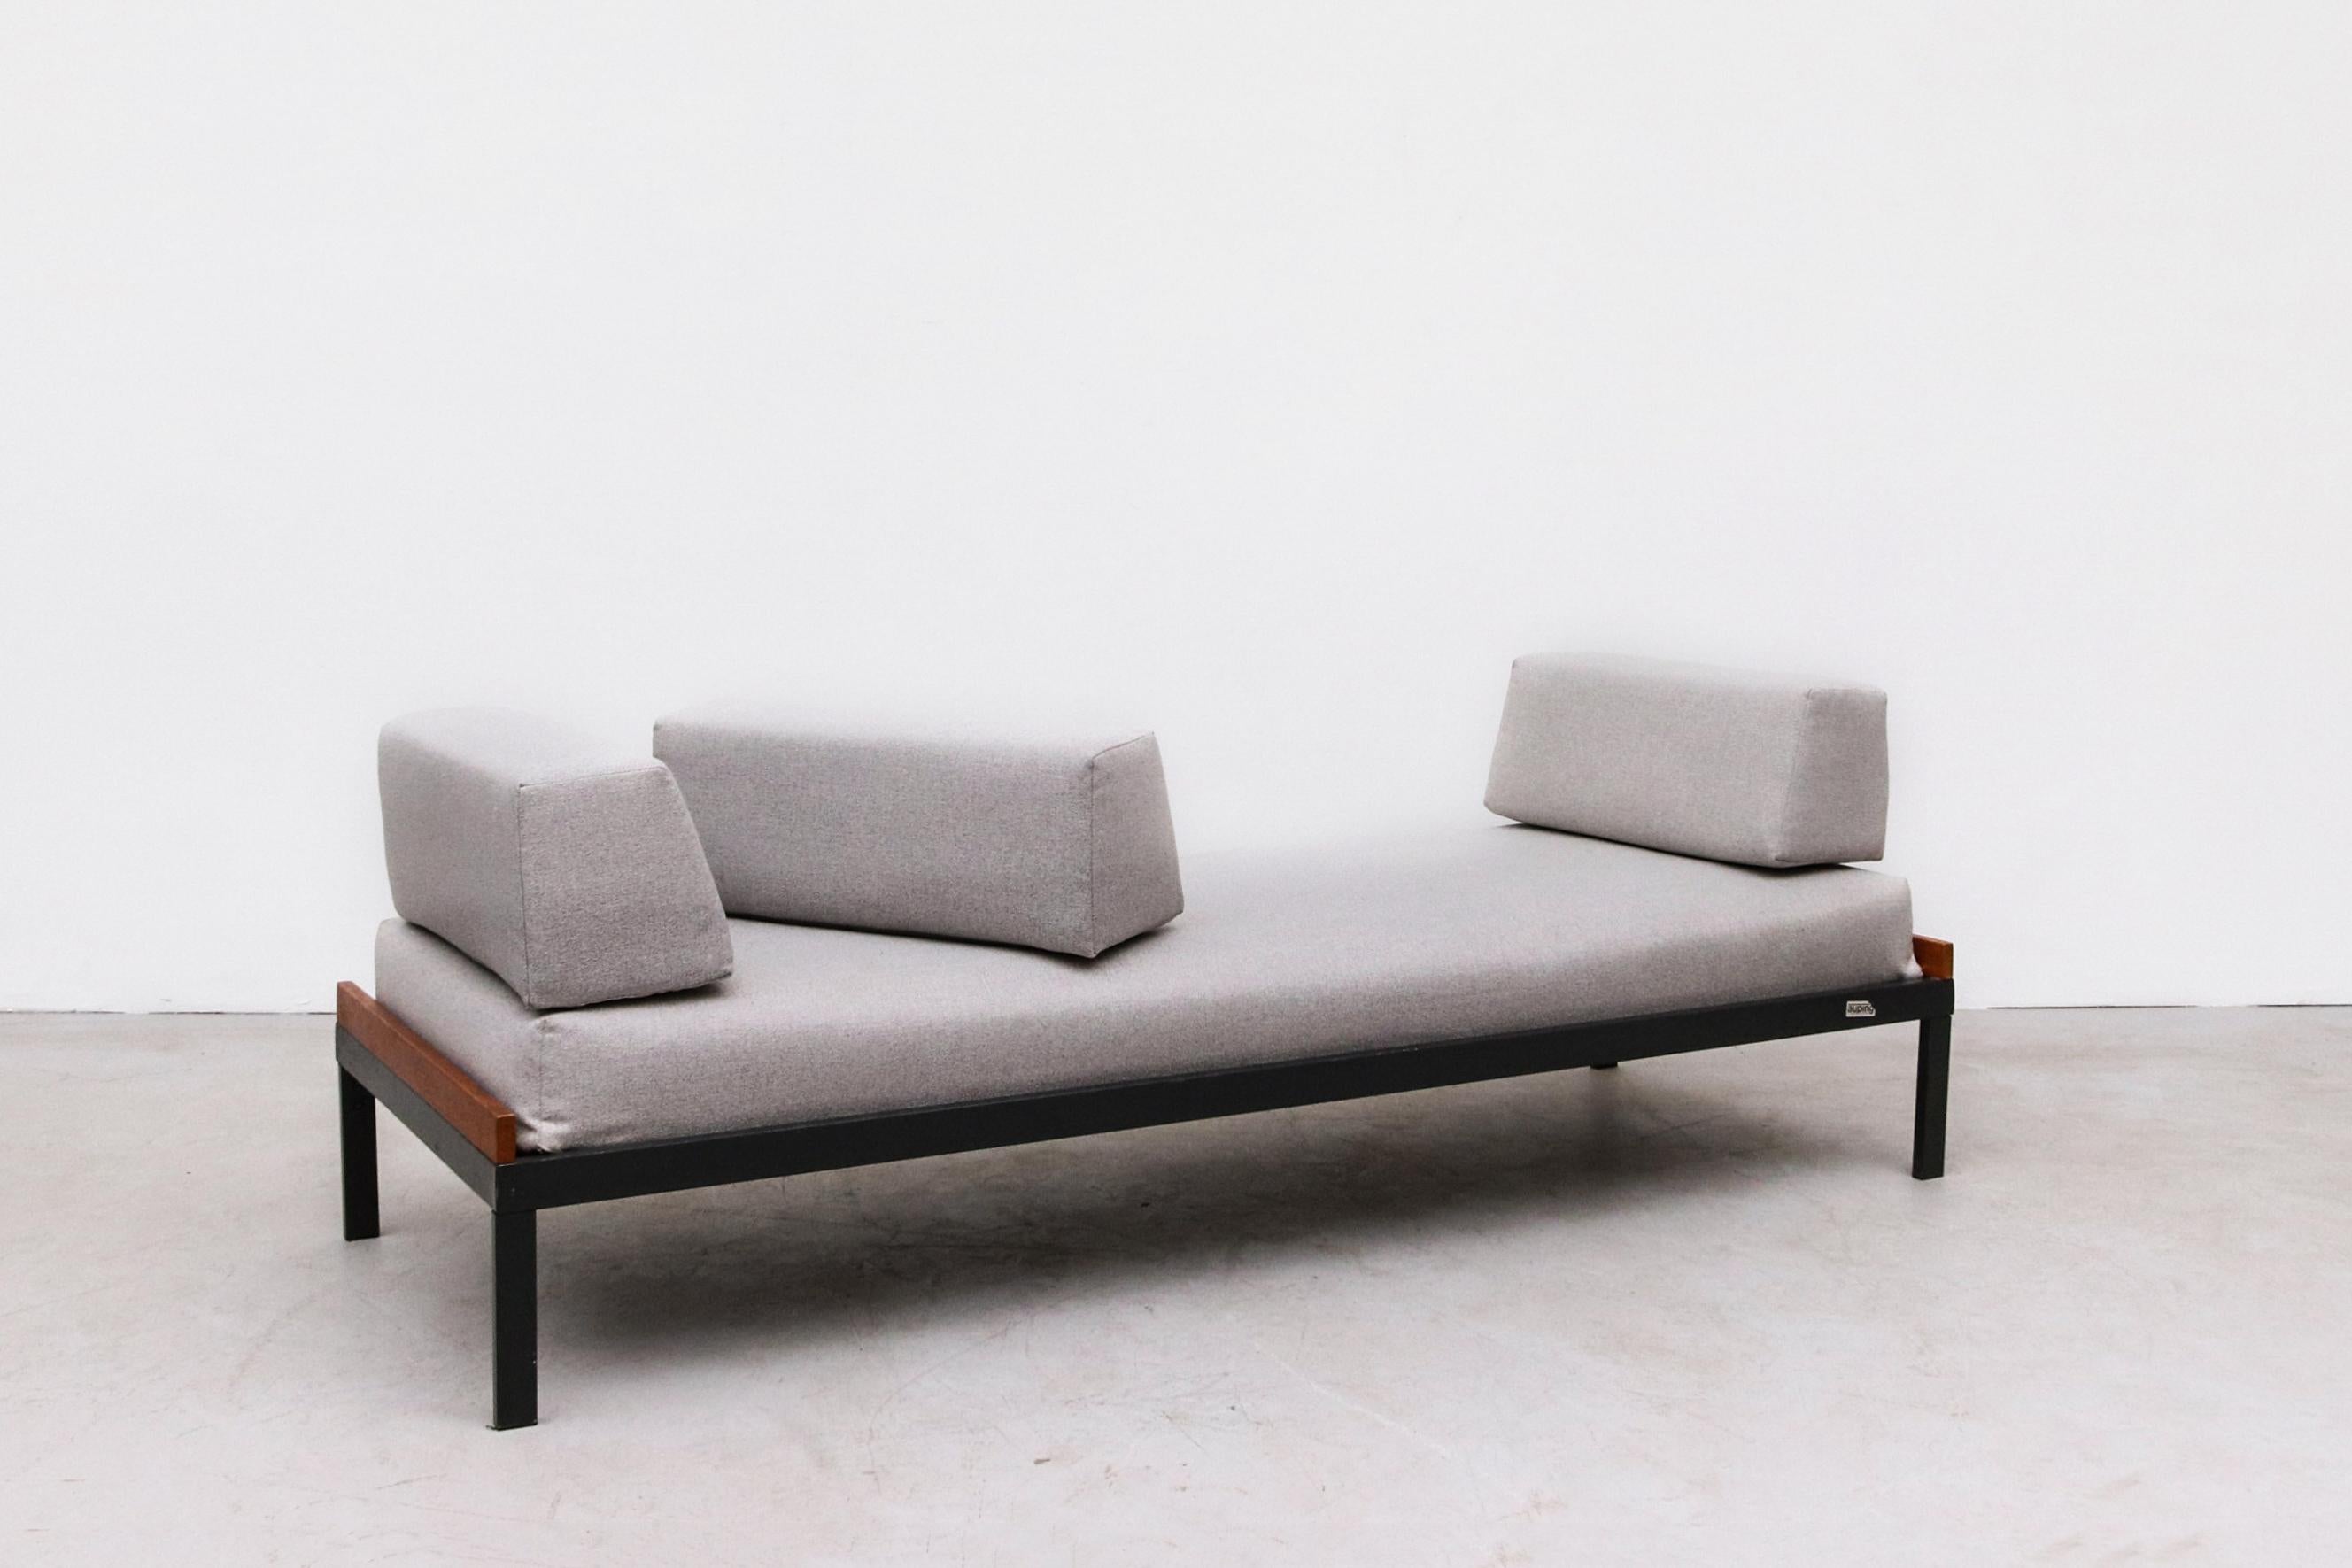 Enameled Friso Kramer 'Couchette' Wood & Black Daybed for Auping, 1965 w/ New Cushions For Sale